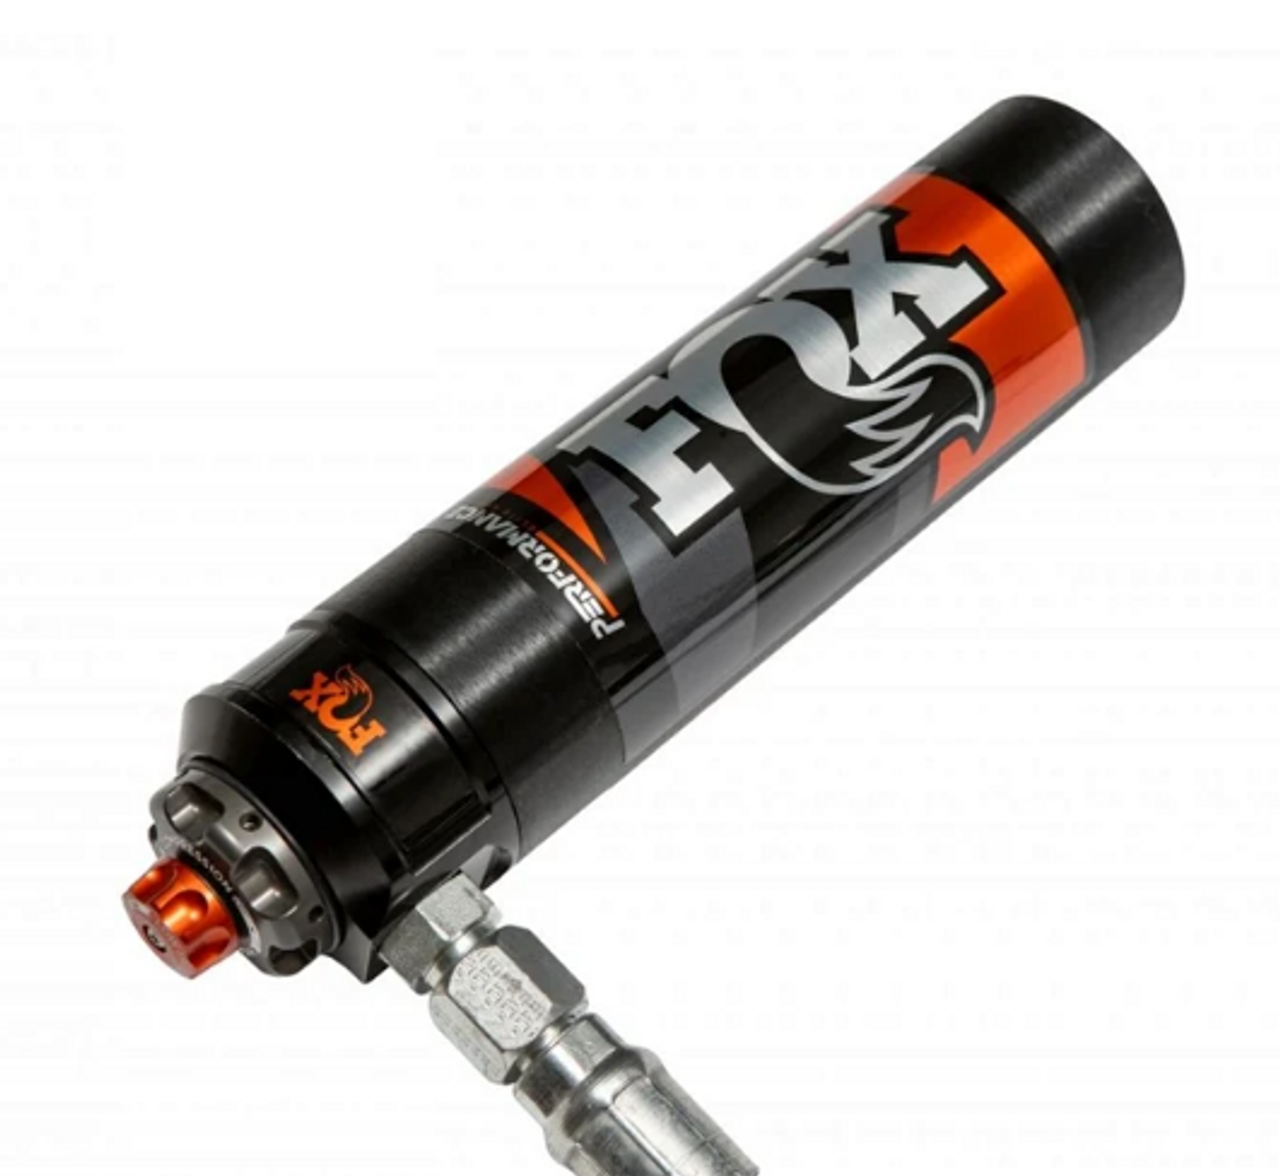 Fox 883-06-213 Elite Adjustable 2.5 Coilover Resi Shocks for Ford Bronco 4 Door with Sasquatch Package 2021+